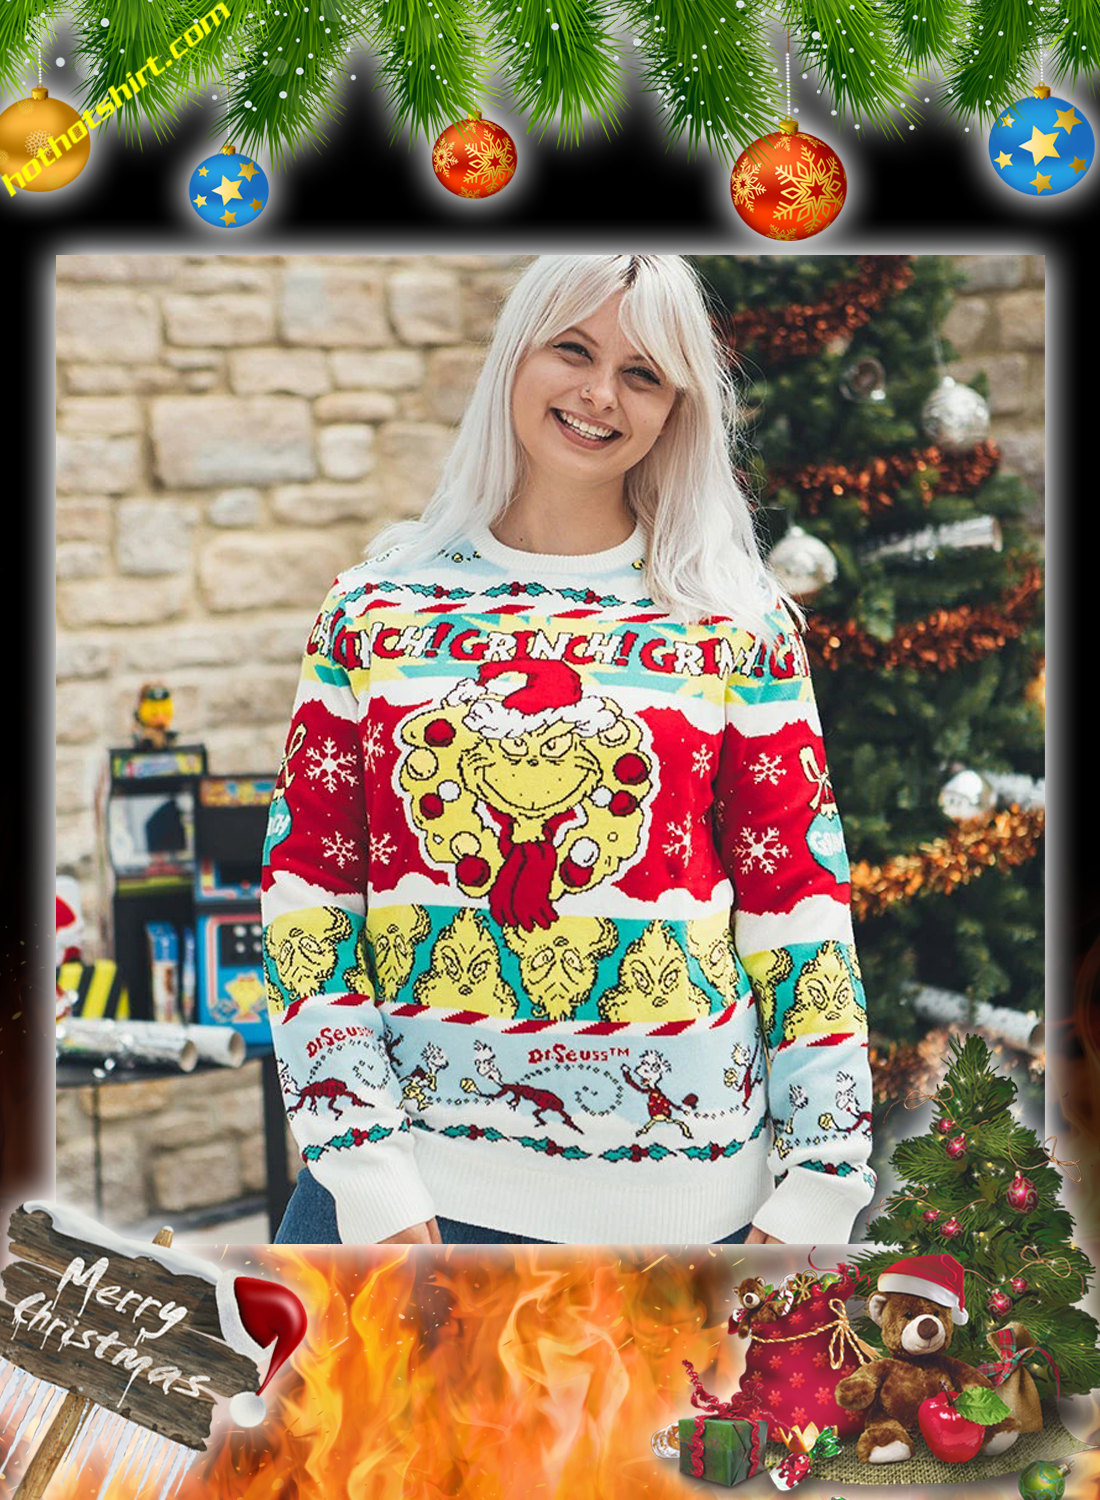 The grinch christmas jumper and ugly sweater 2